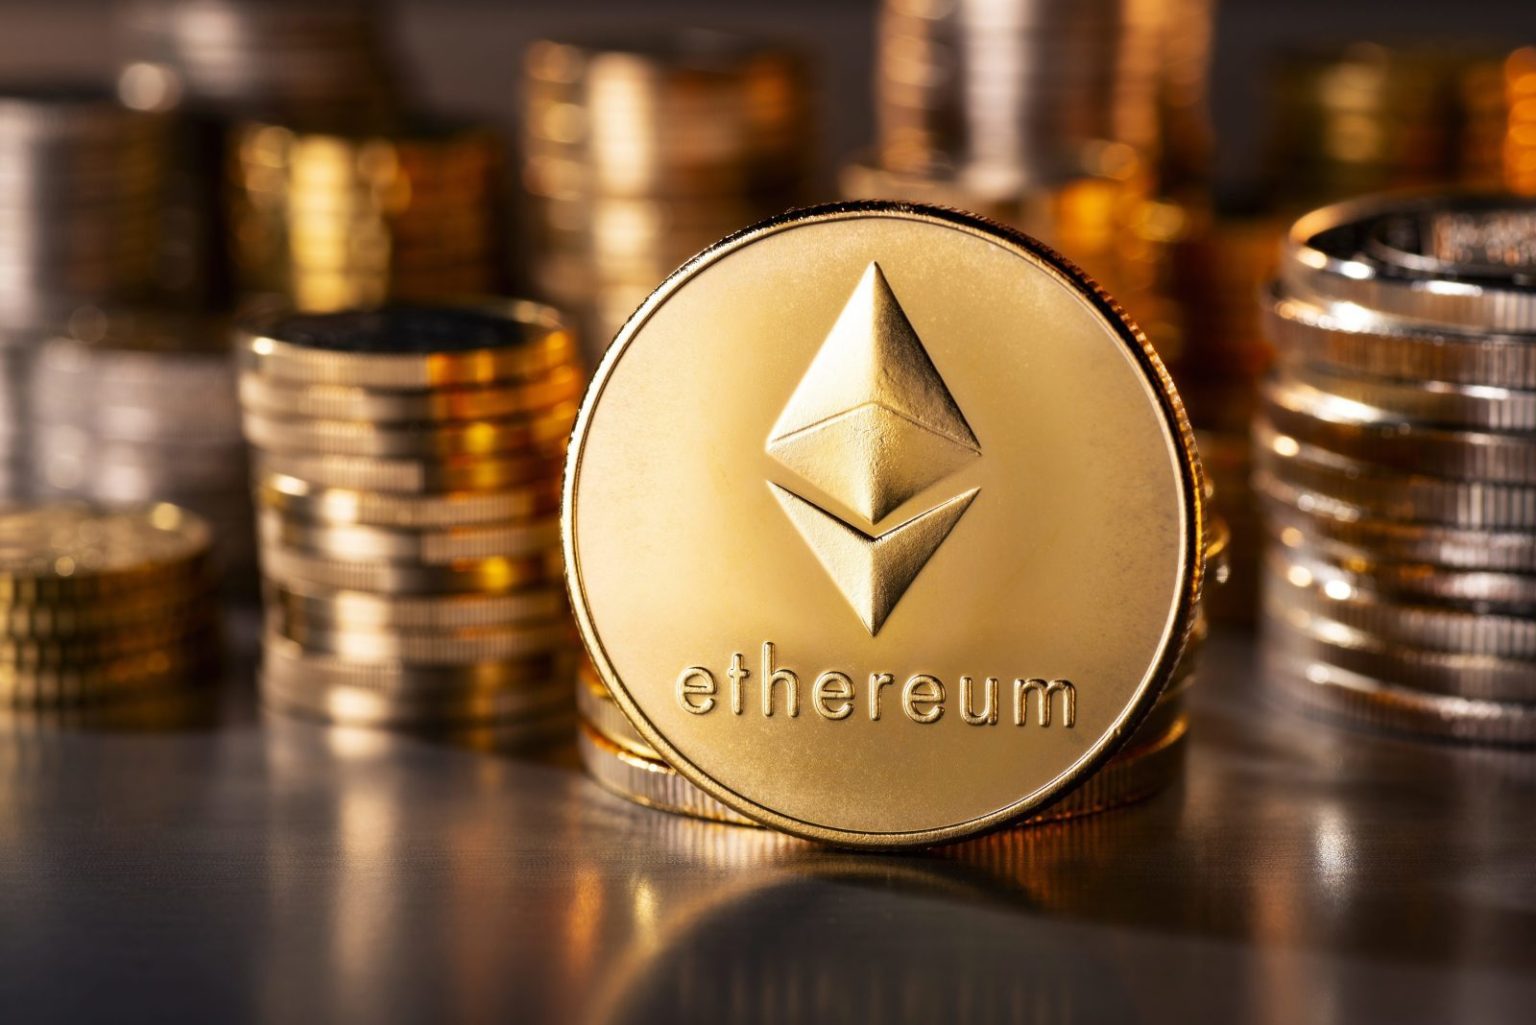 Ethereum Investment Products Attract Substantial Weekly Inflows